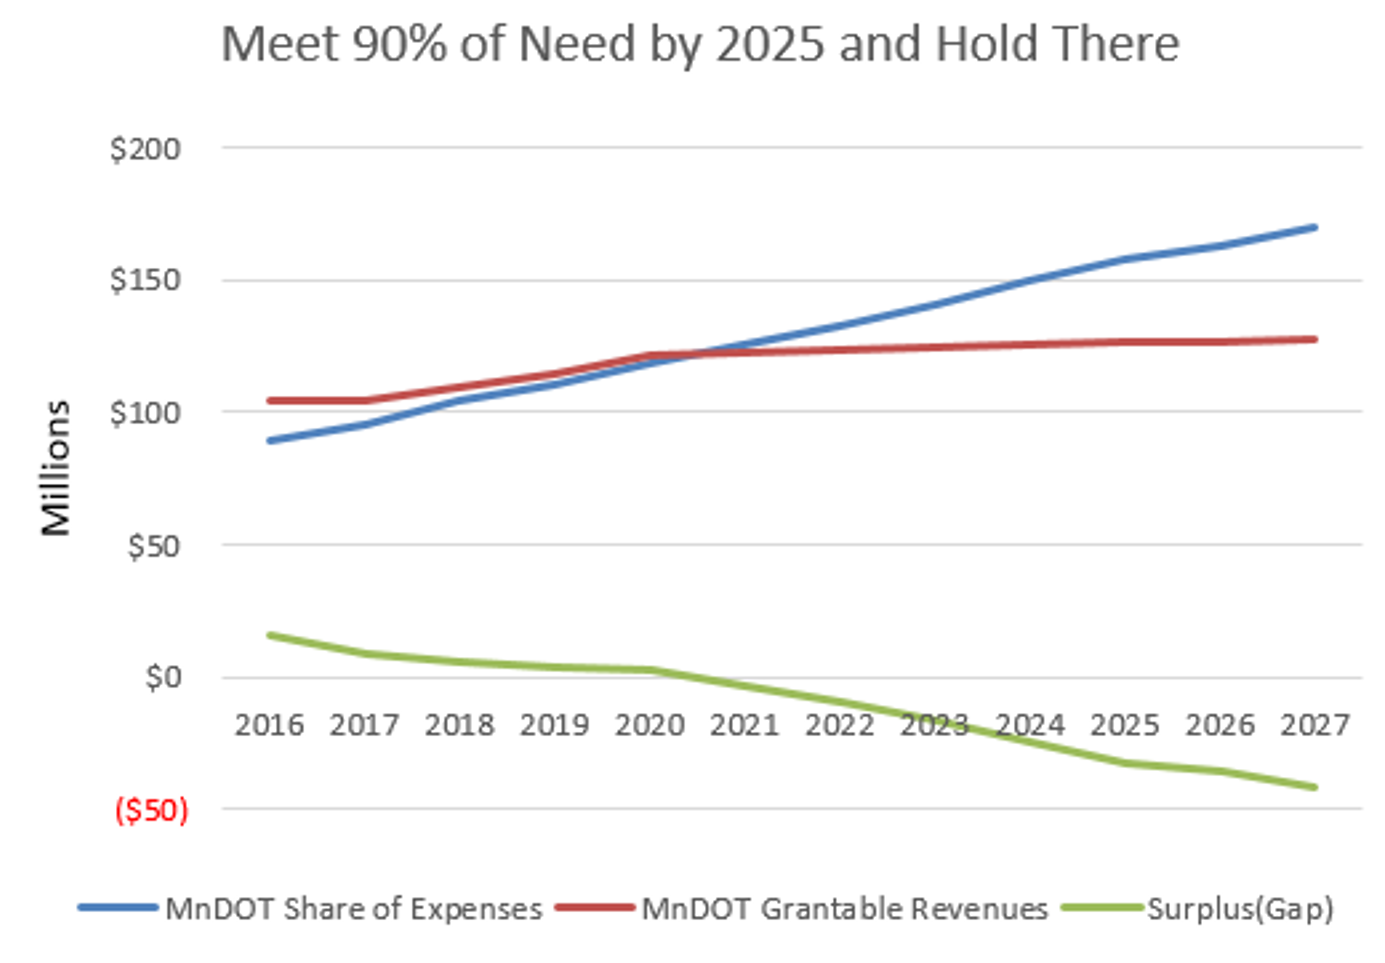 Graph of Program Expenses and Cost Gap